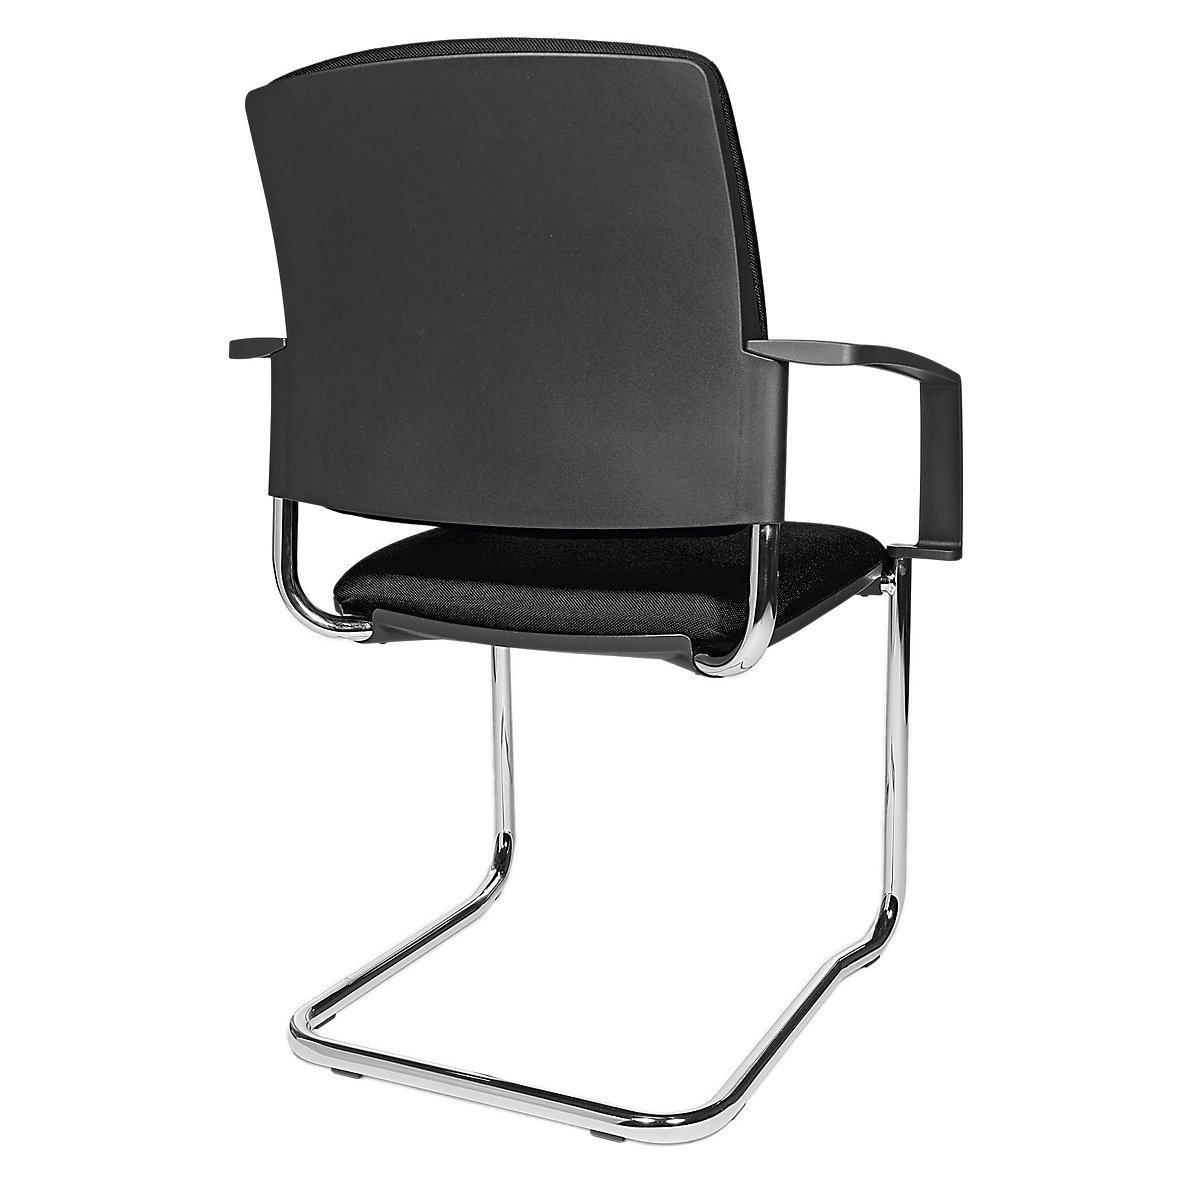 Padded stacking chair – Topstar, cantilever chair, pack of 2, chrome plated frame, black upholstery-5